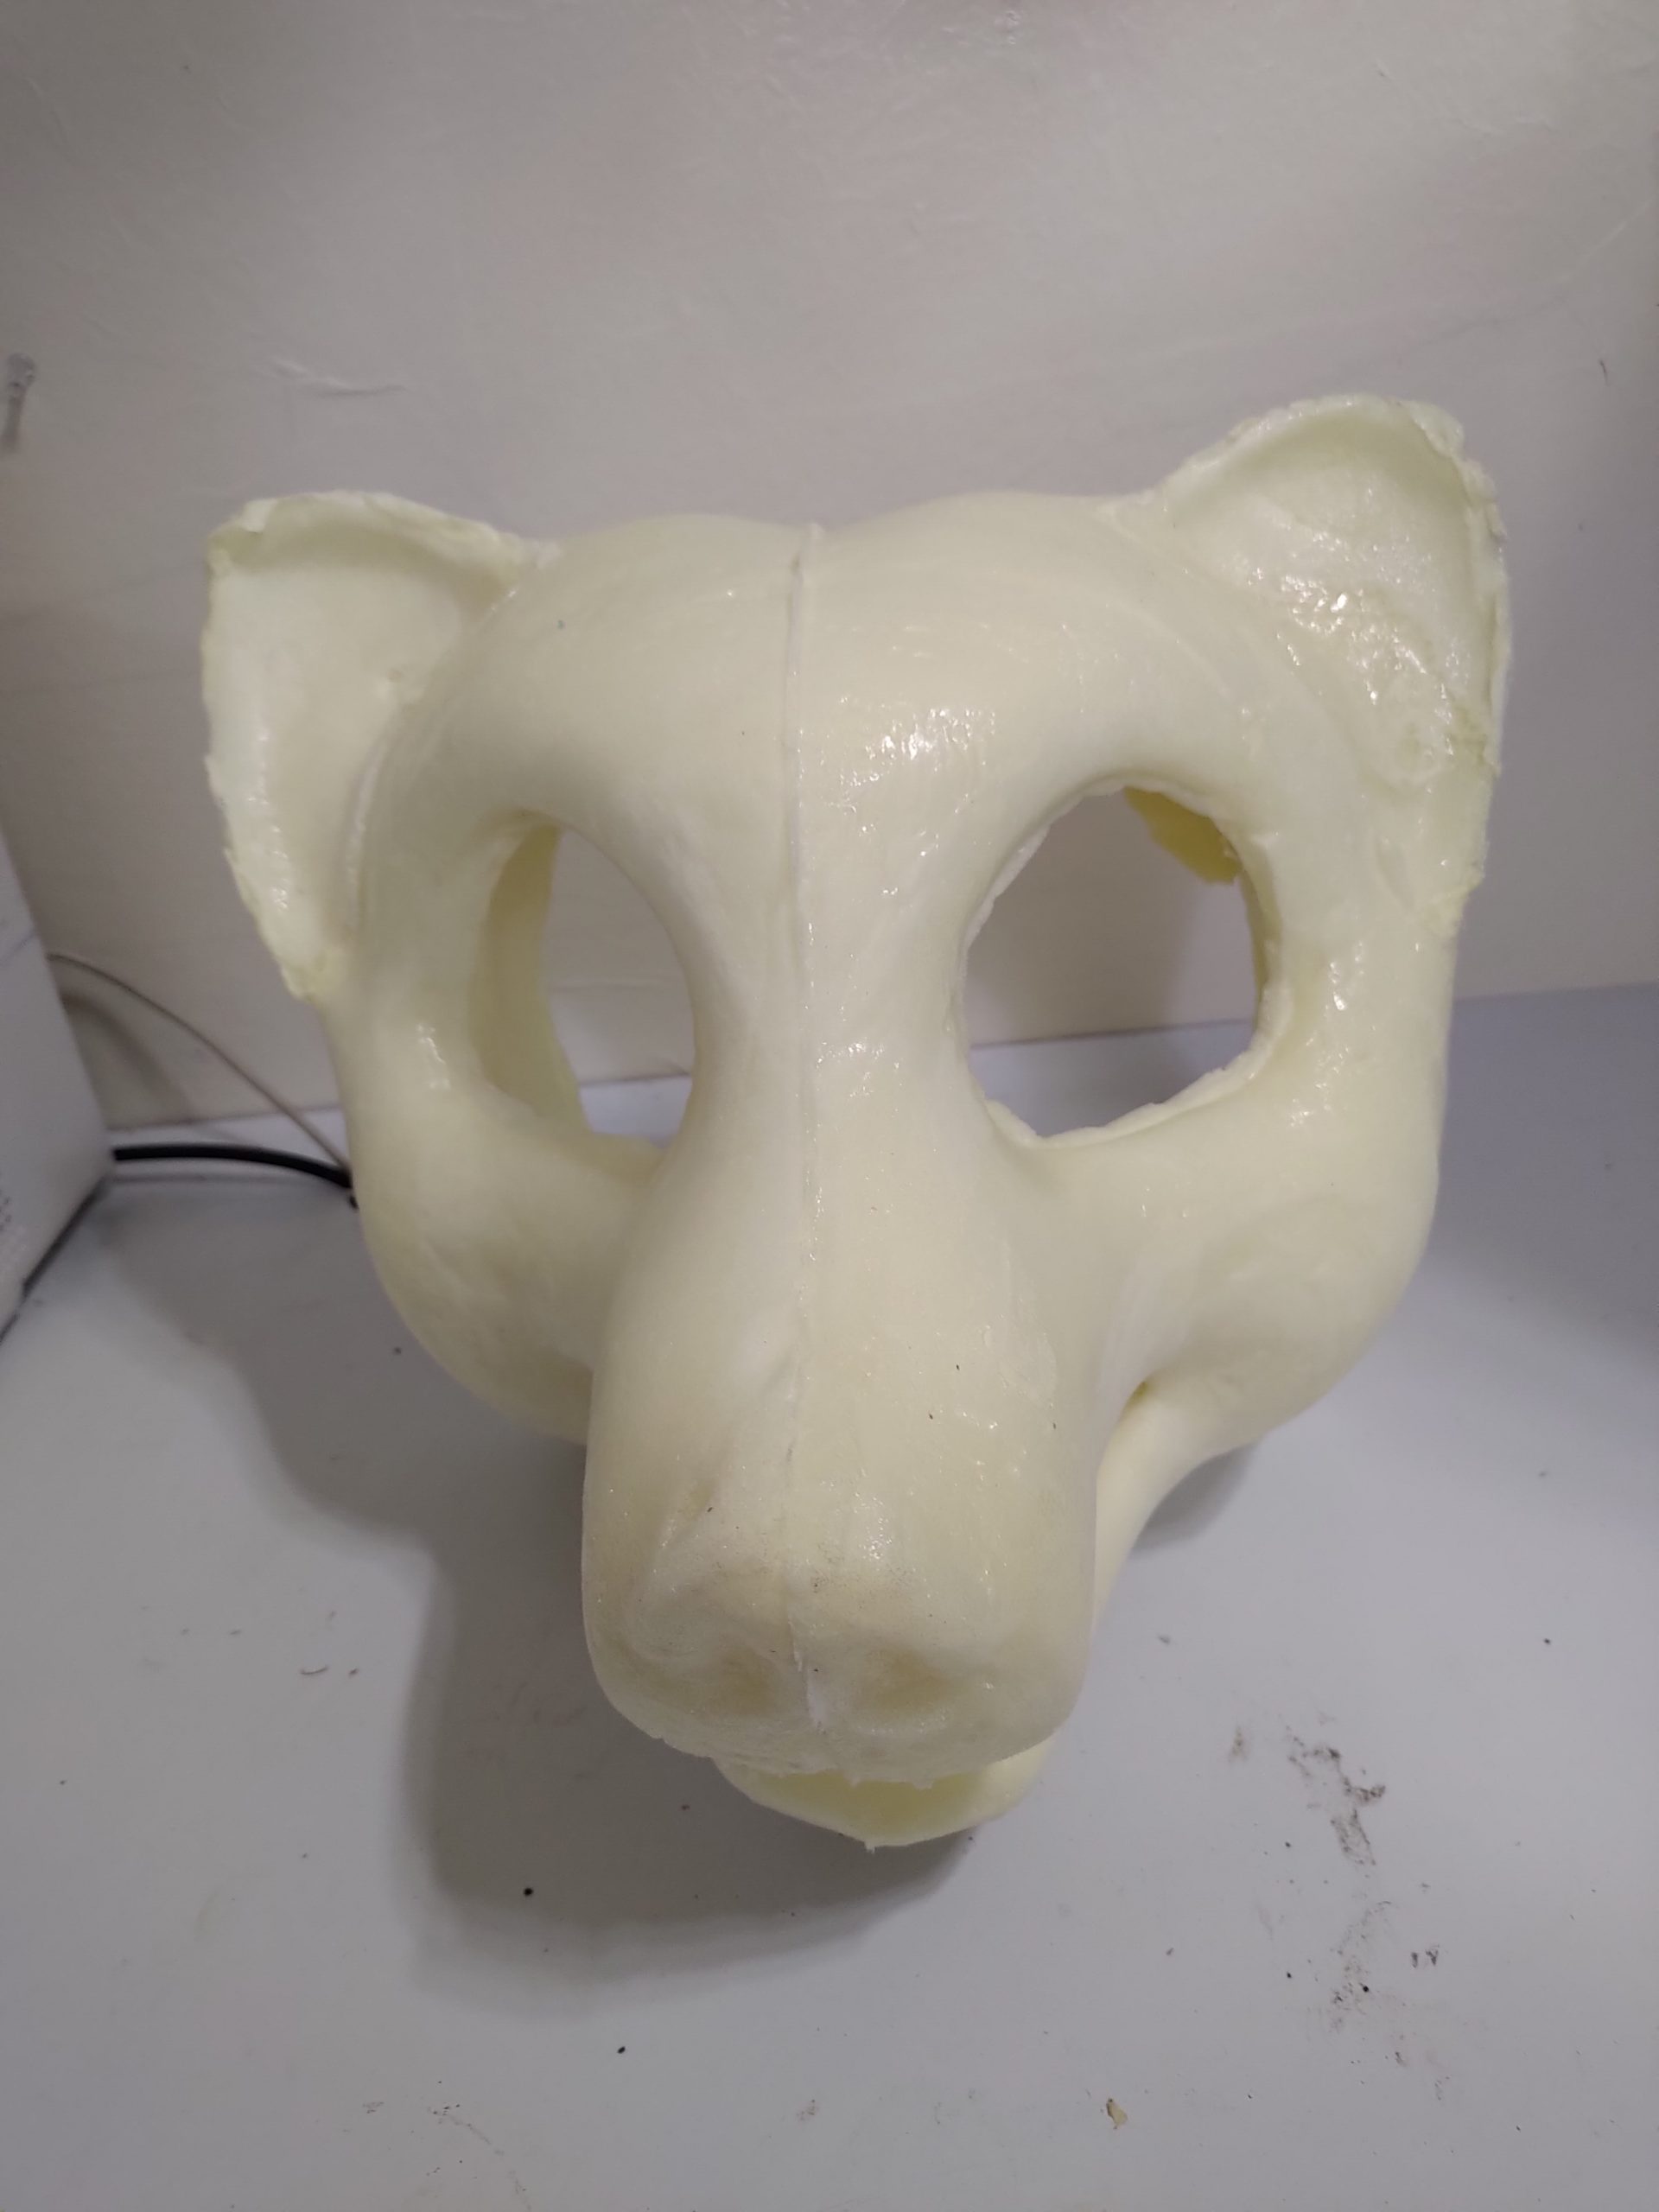 Ben the Bear, Furry Fursuit Foam Full Head Base for Fursuiting, For Furries  and Cosplay - DIY - fhb17 